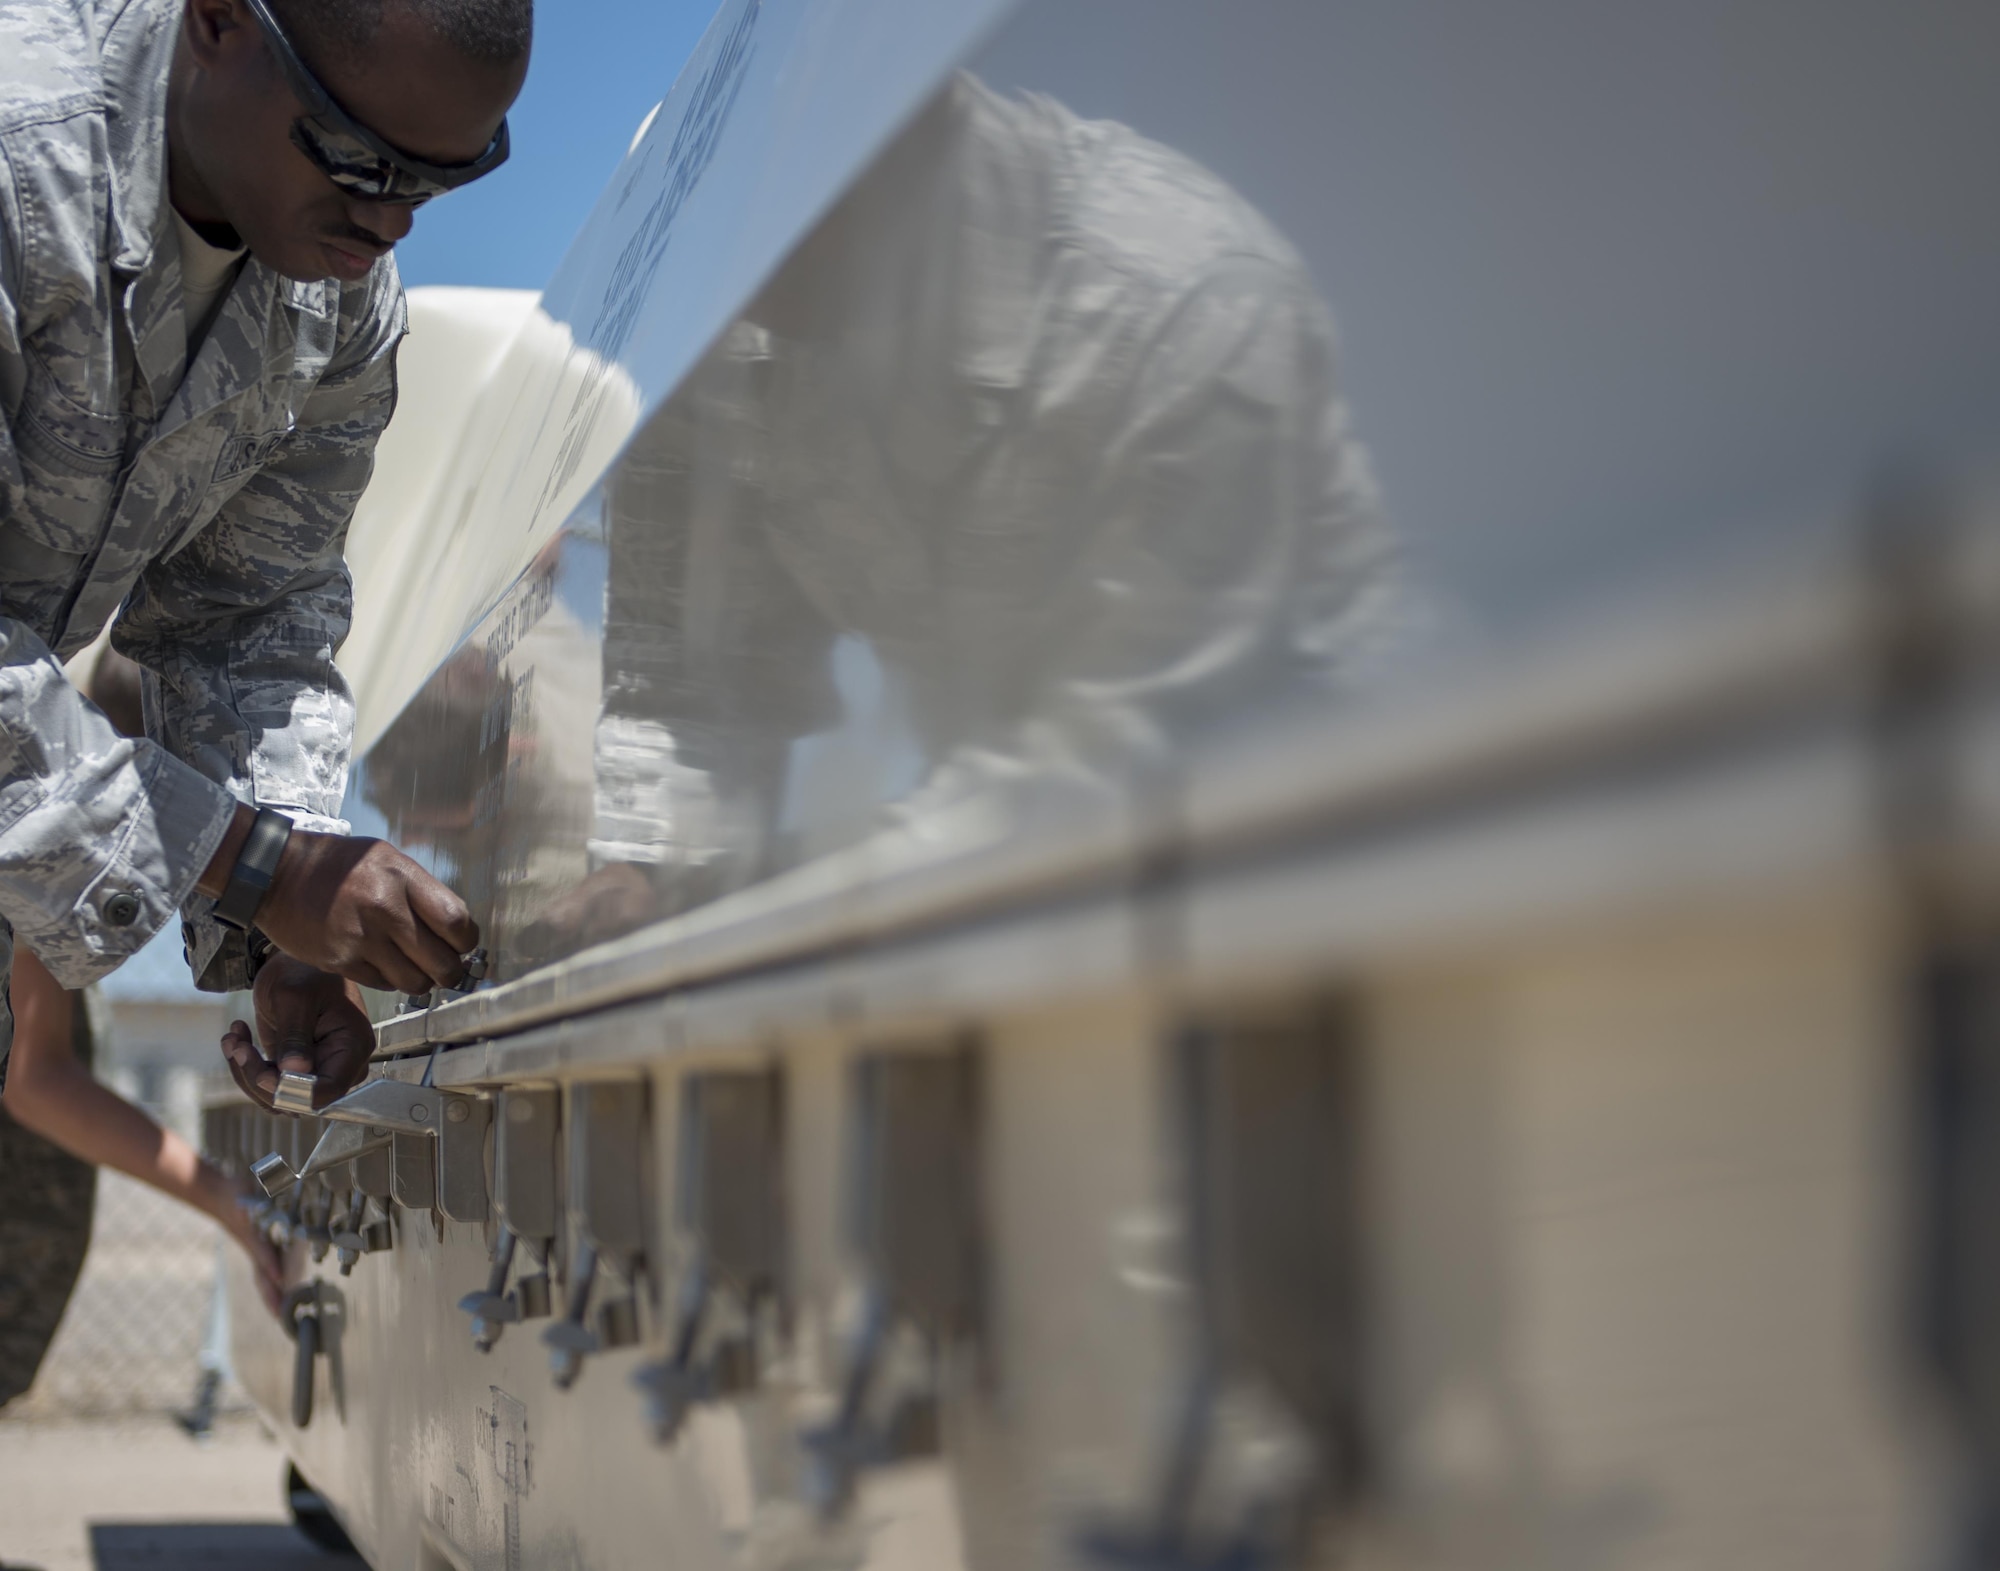 Master Sgt. Robert, a 9th Aircraft Maintenance Unit specialist section chief at Holloman Air Force Base, N.M., unlatches the container housing an MQ-1 Predator at Kirtland AFB on June 3. Over 50,000 people visited the Kirtland AFB Open House on June 4 and 5. Holloman Airmen had the opportunity to display an MQ-1 Predator and answer questions visitors had about RPAs and their mission at Holloman. (Last names are being withheld due to operational requirements. U.S. Air Force photo by Airman 1st Class Randahl J. Jenson) 